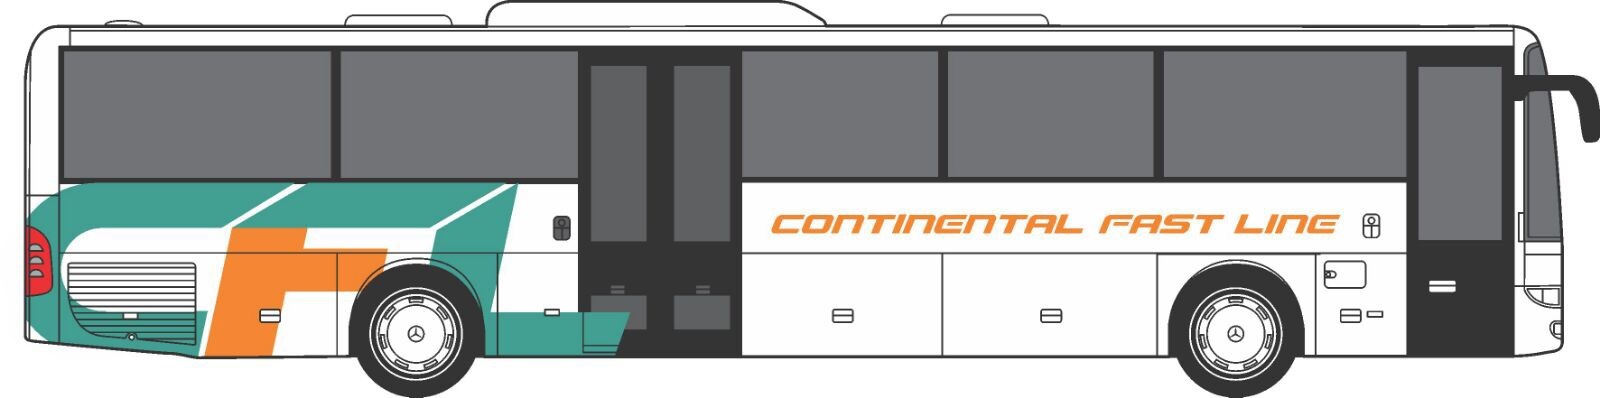 CONTINENTAL FAST LINE S.R.L. undefined: afbeelding 2